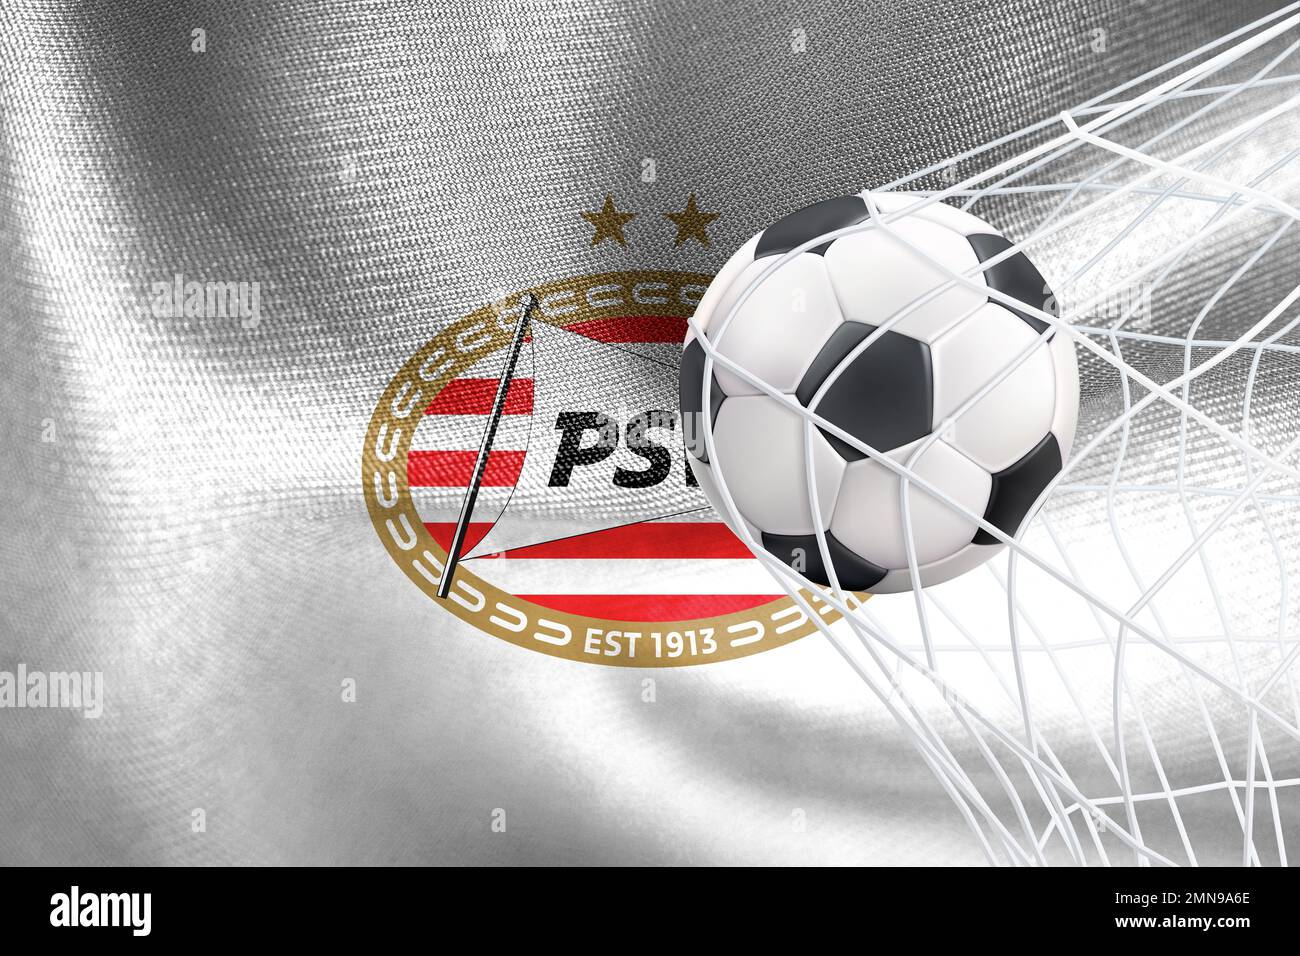 UEFA Champions League 2023, PSV flag with a soccer ball in net, UEFA Wallpaper, 3D work and 3D image. Yerevan, Armenia - 2023 January 27 Stock Photo